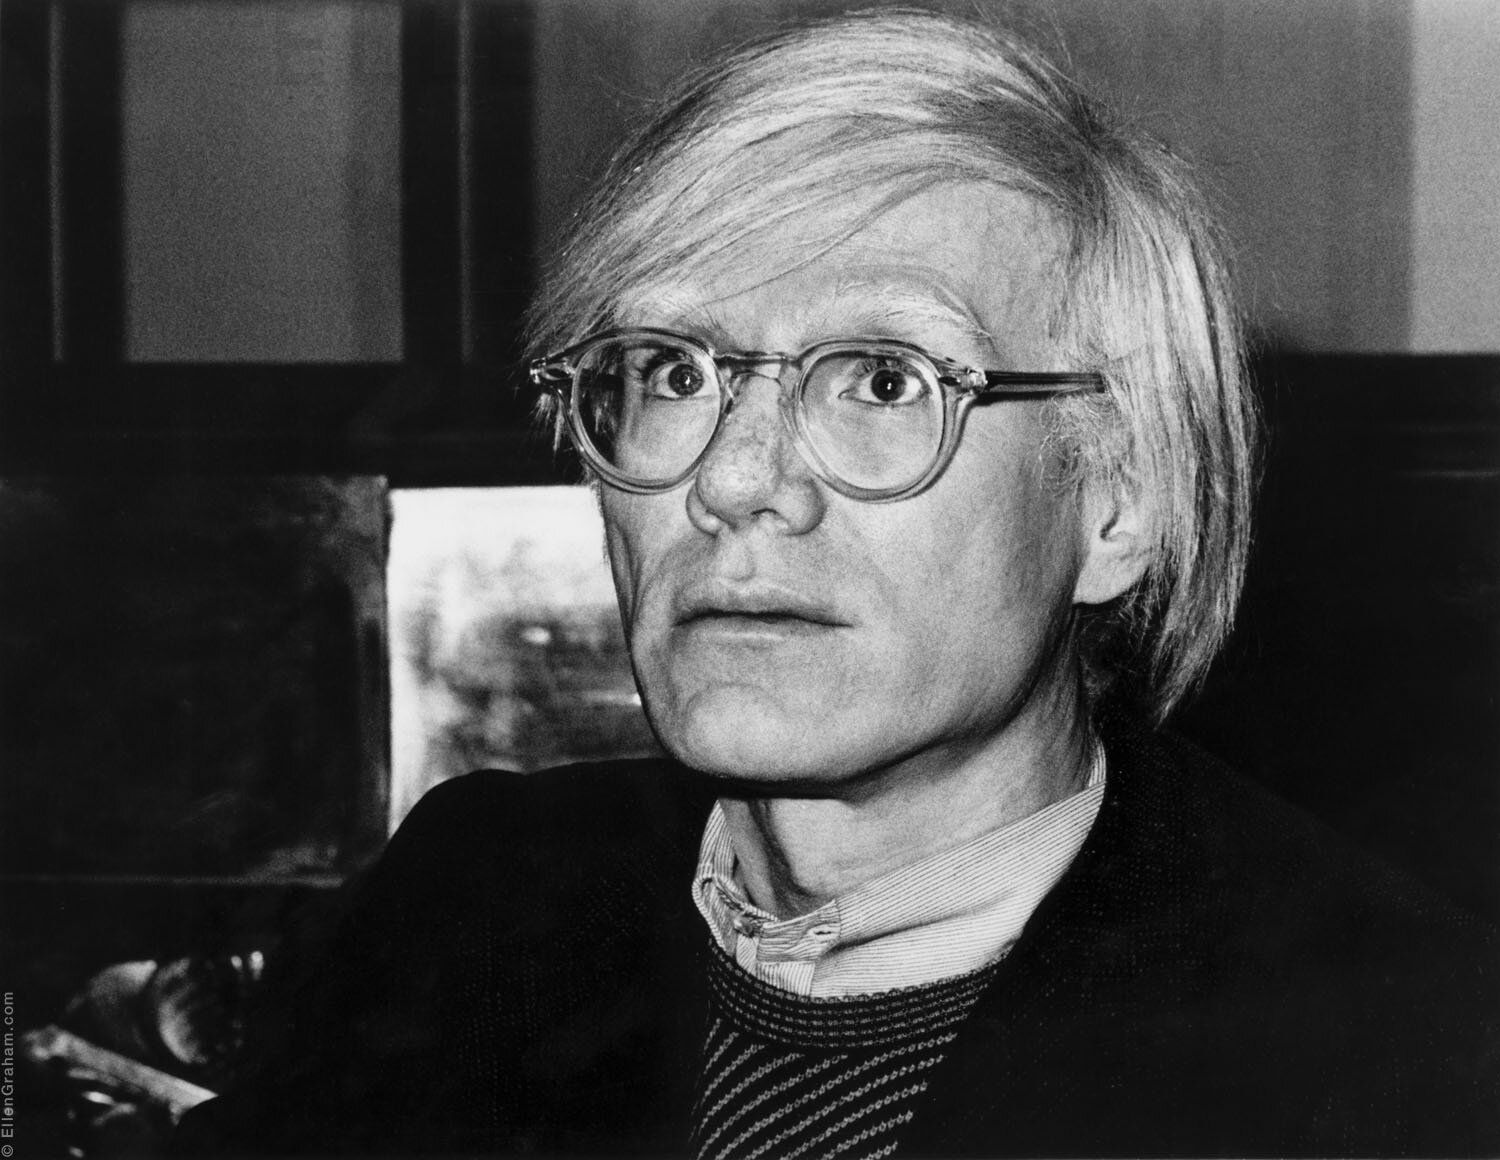 Andy Warhol, The Factory, New York, NY, 1974